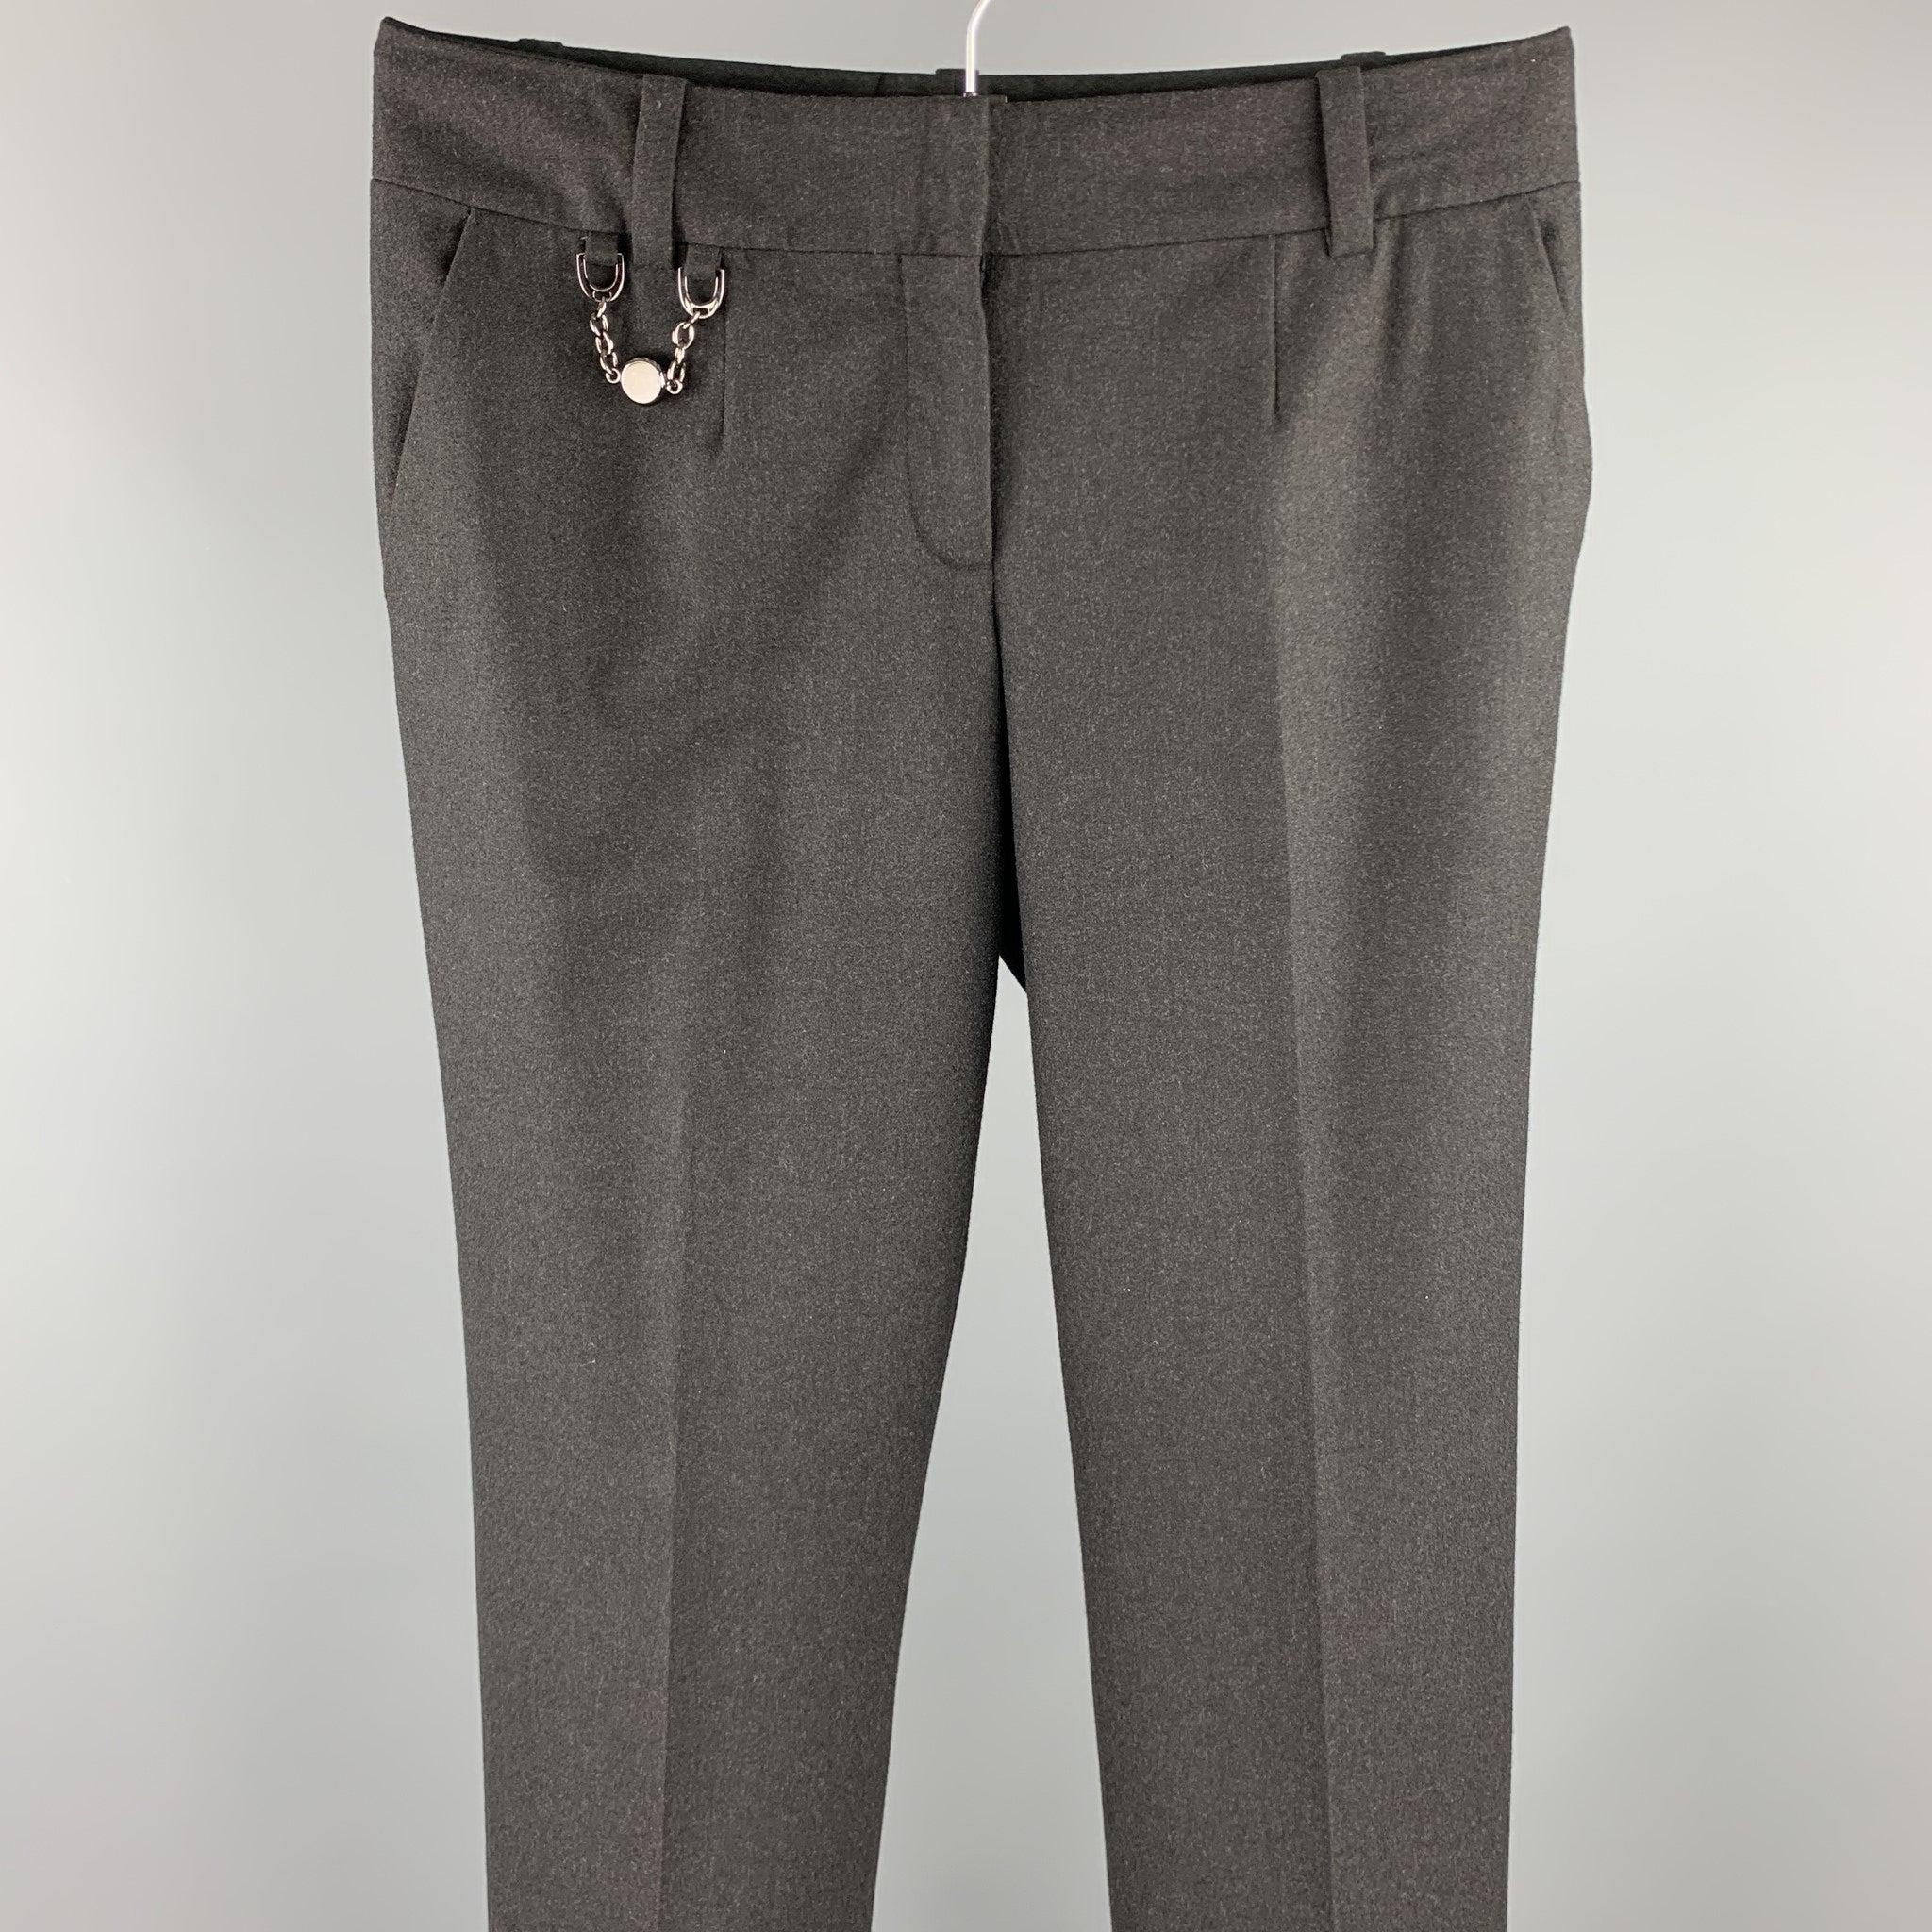 CELINE dress pants comes in a charcoal wool / elastane featuring a wide leg, metal chain detail, and a zip fly closure.
Excellent
Pre-Owned Condition. 

Marked:   40 

Measurements: 
  Waist: 32 inches 
Rise: 7.5 inches 
Inseam: 31 inches 
  
  
